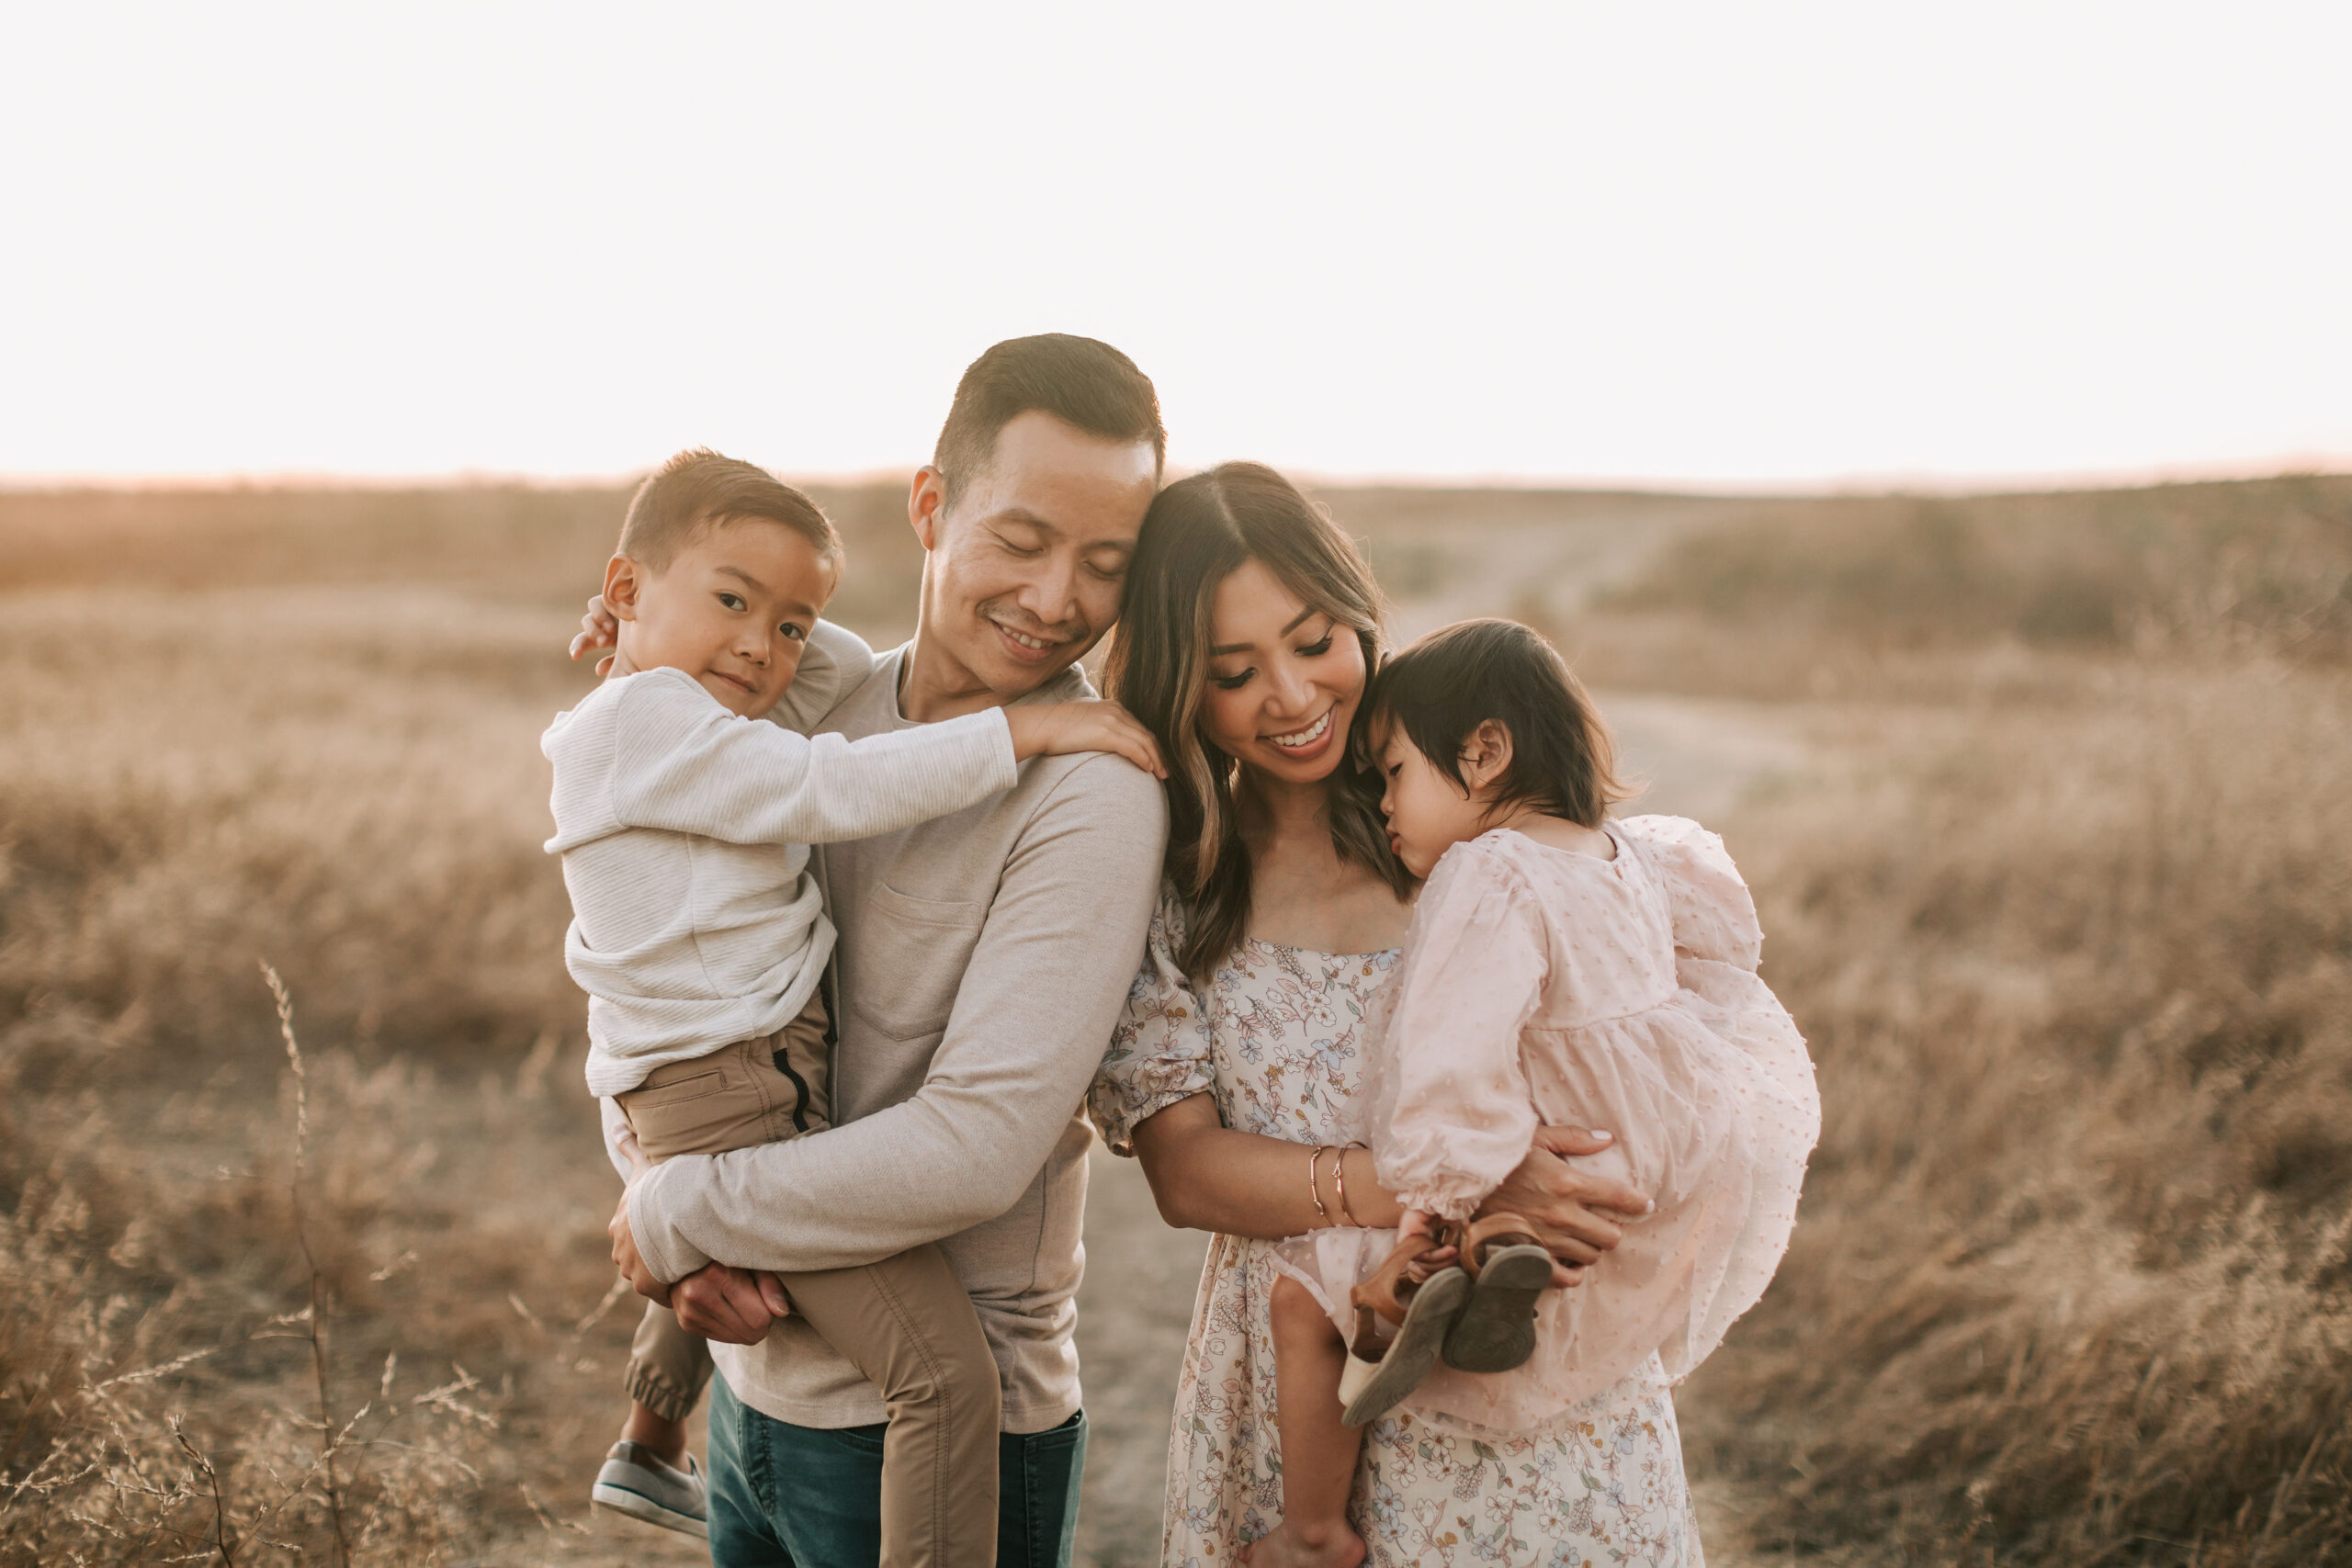 Family photo session in Costa Mesa, CA by Orange County Photographer Bethany Jean Photography